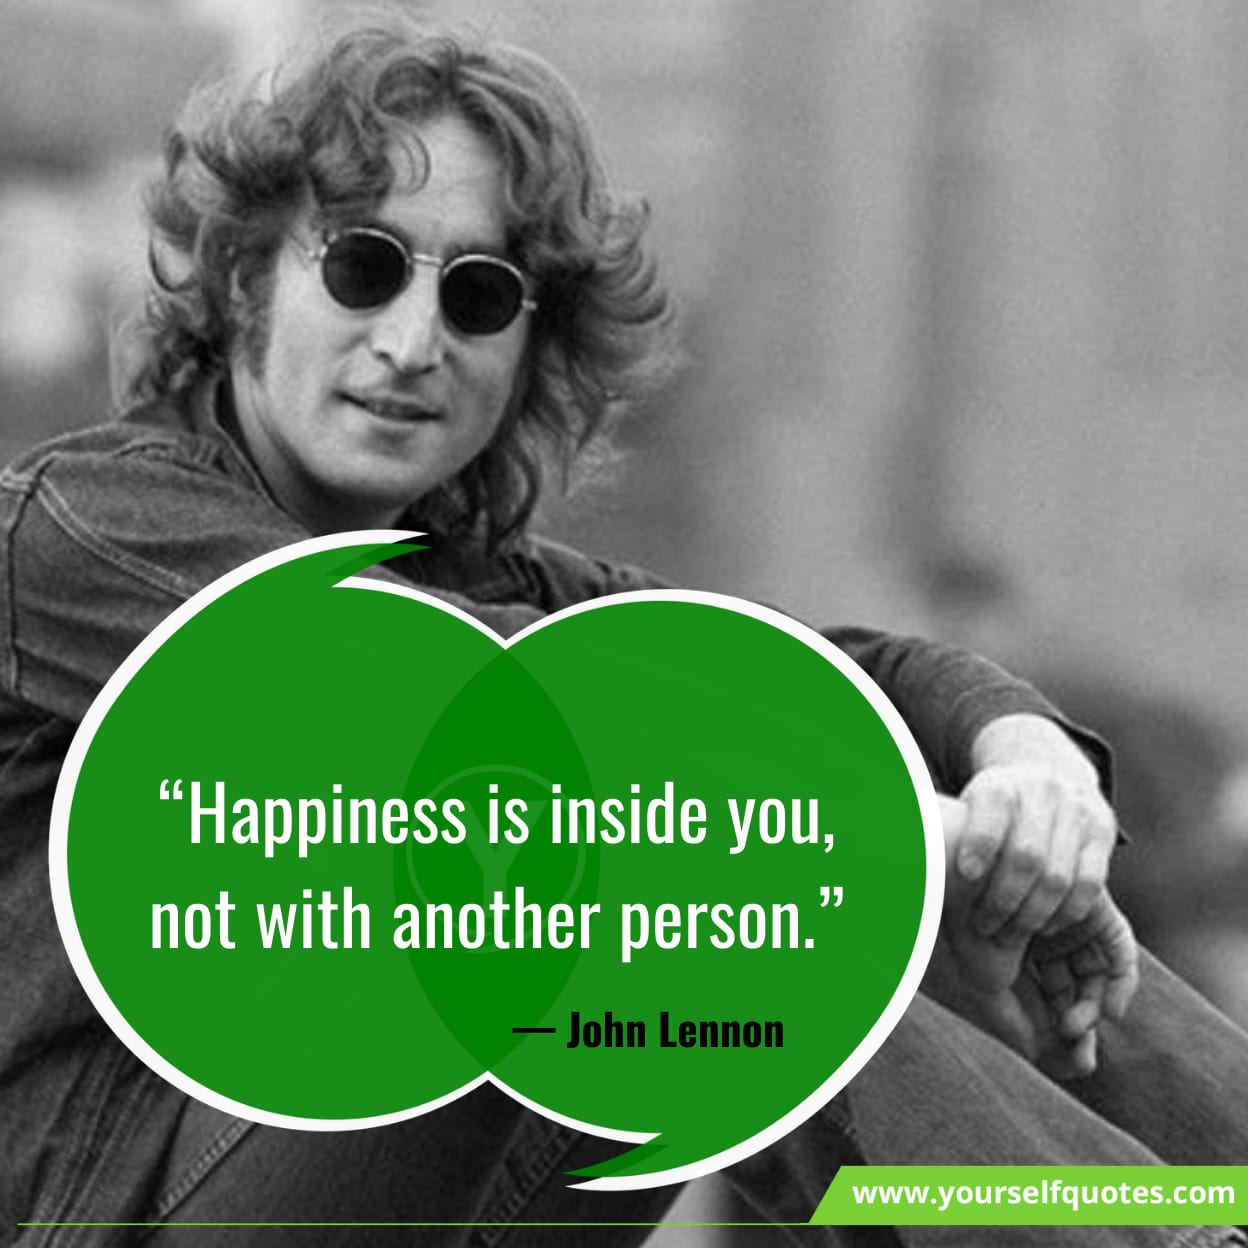 John Lennon Quotes On Happiness